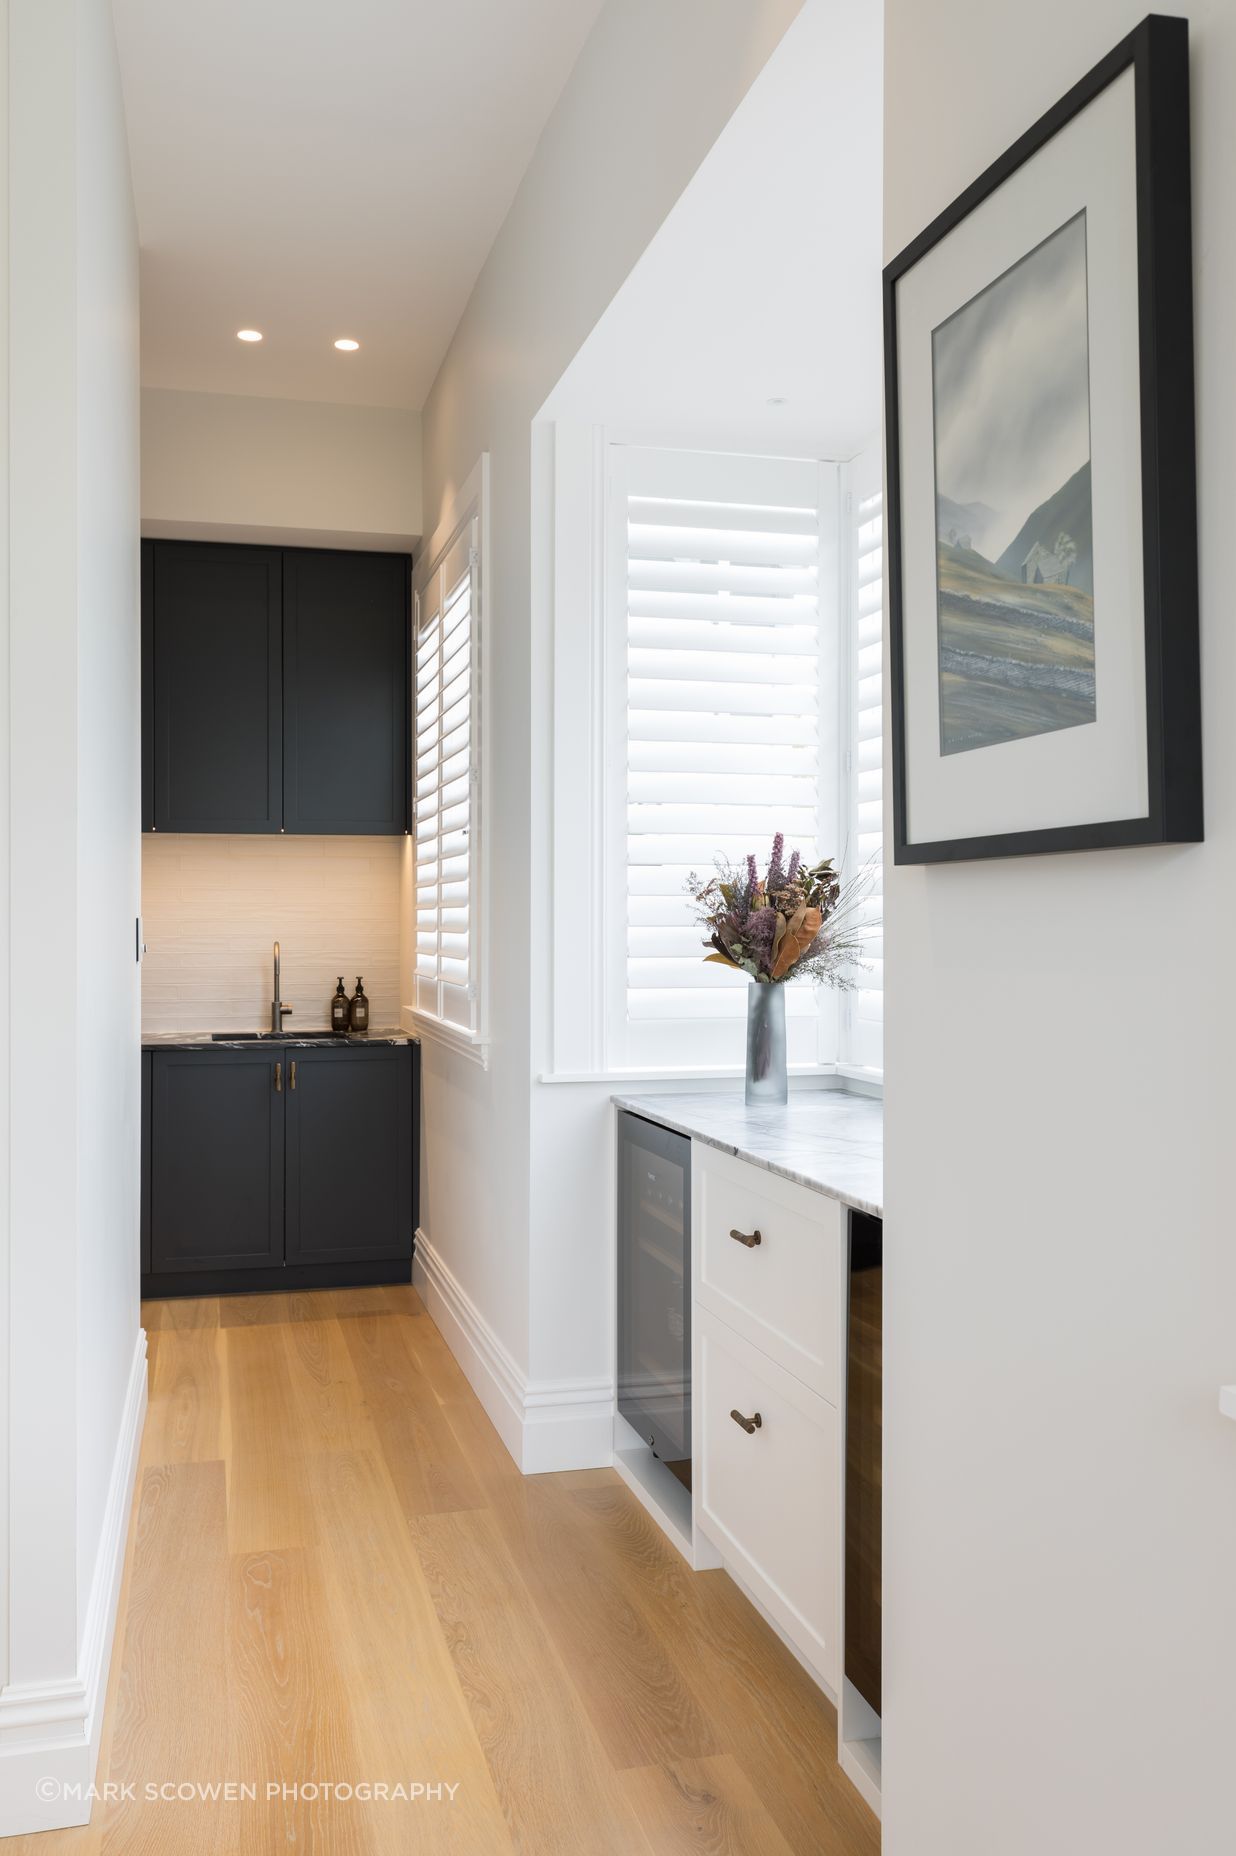 The scullery tucked around a corner hides a second refrigerator. The dark cabinetry in Resene Double Tuna echoes the dark marble used in the kitchen.